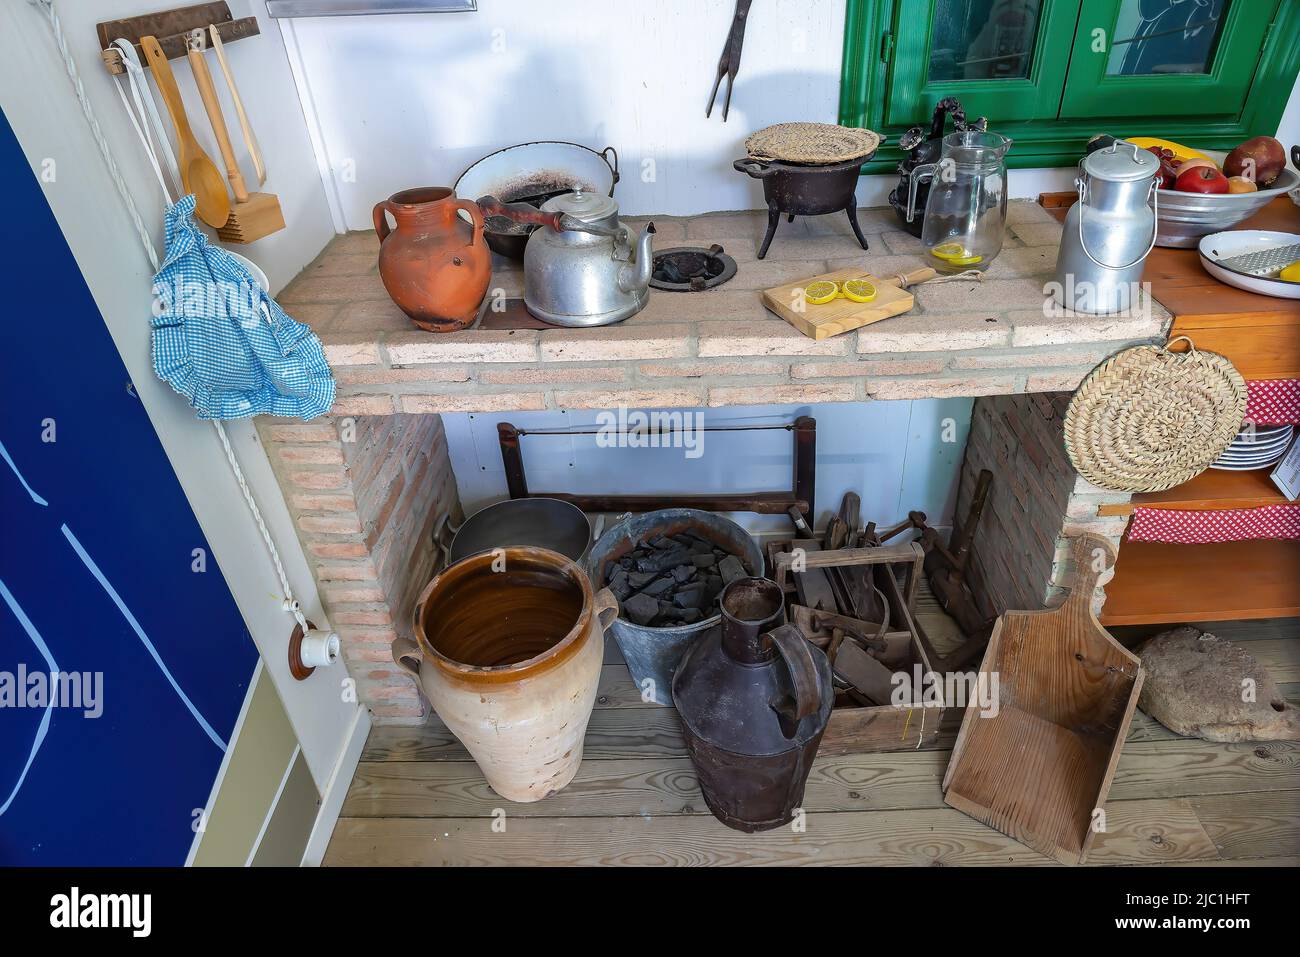 https://c8.alamy.com/comp/2JC1HFT/old-kitchenware-utensils-on-an-old-kitchen-of-a-country-house-2JC1HFT.jpg